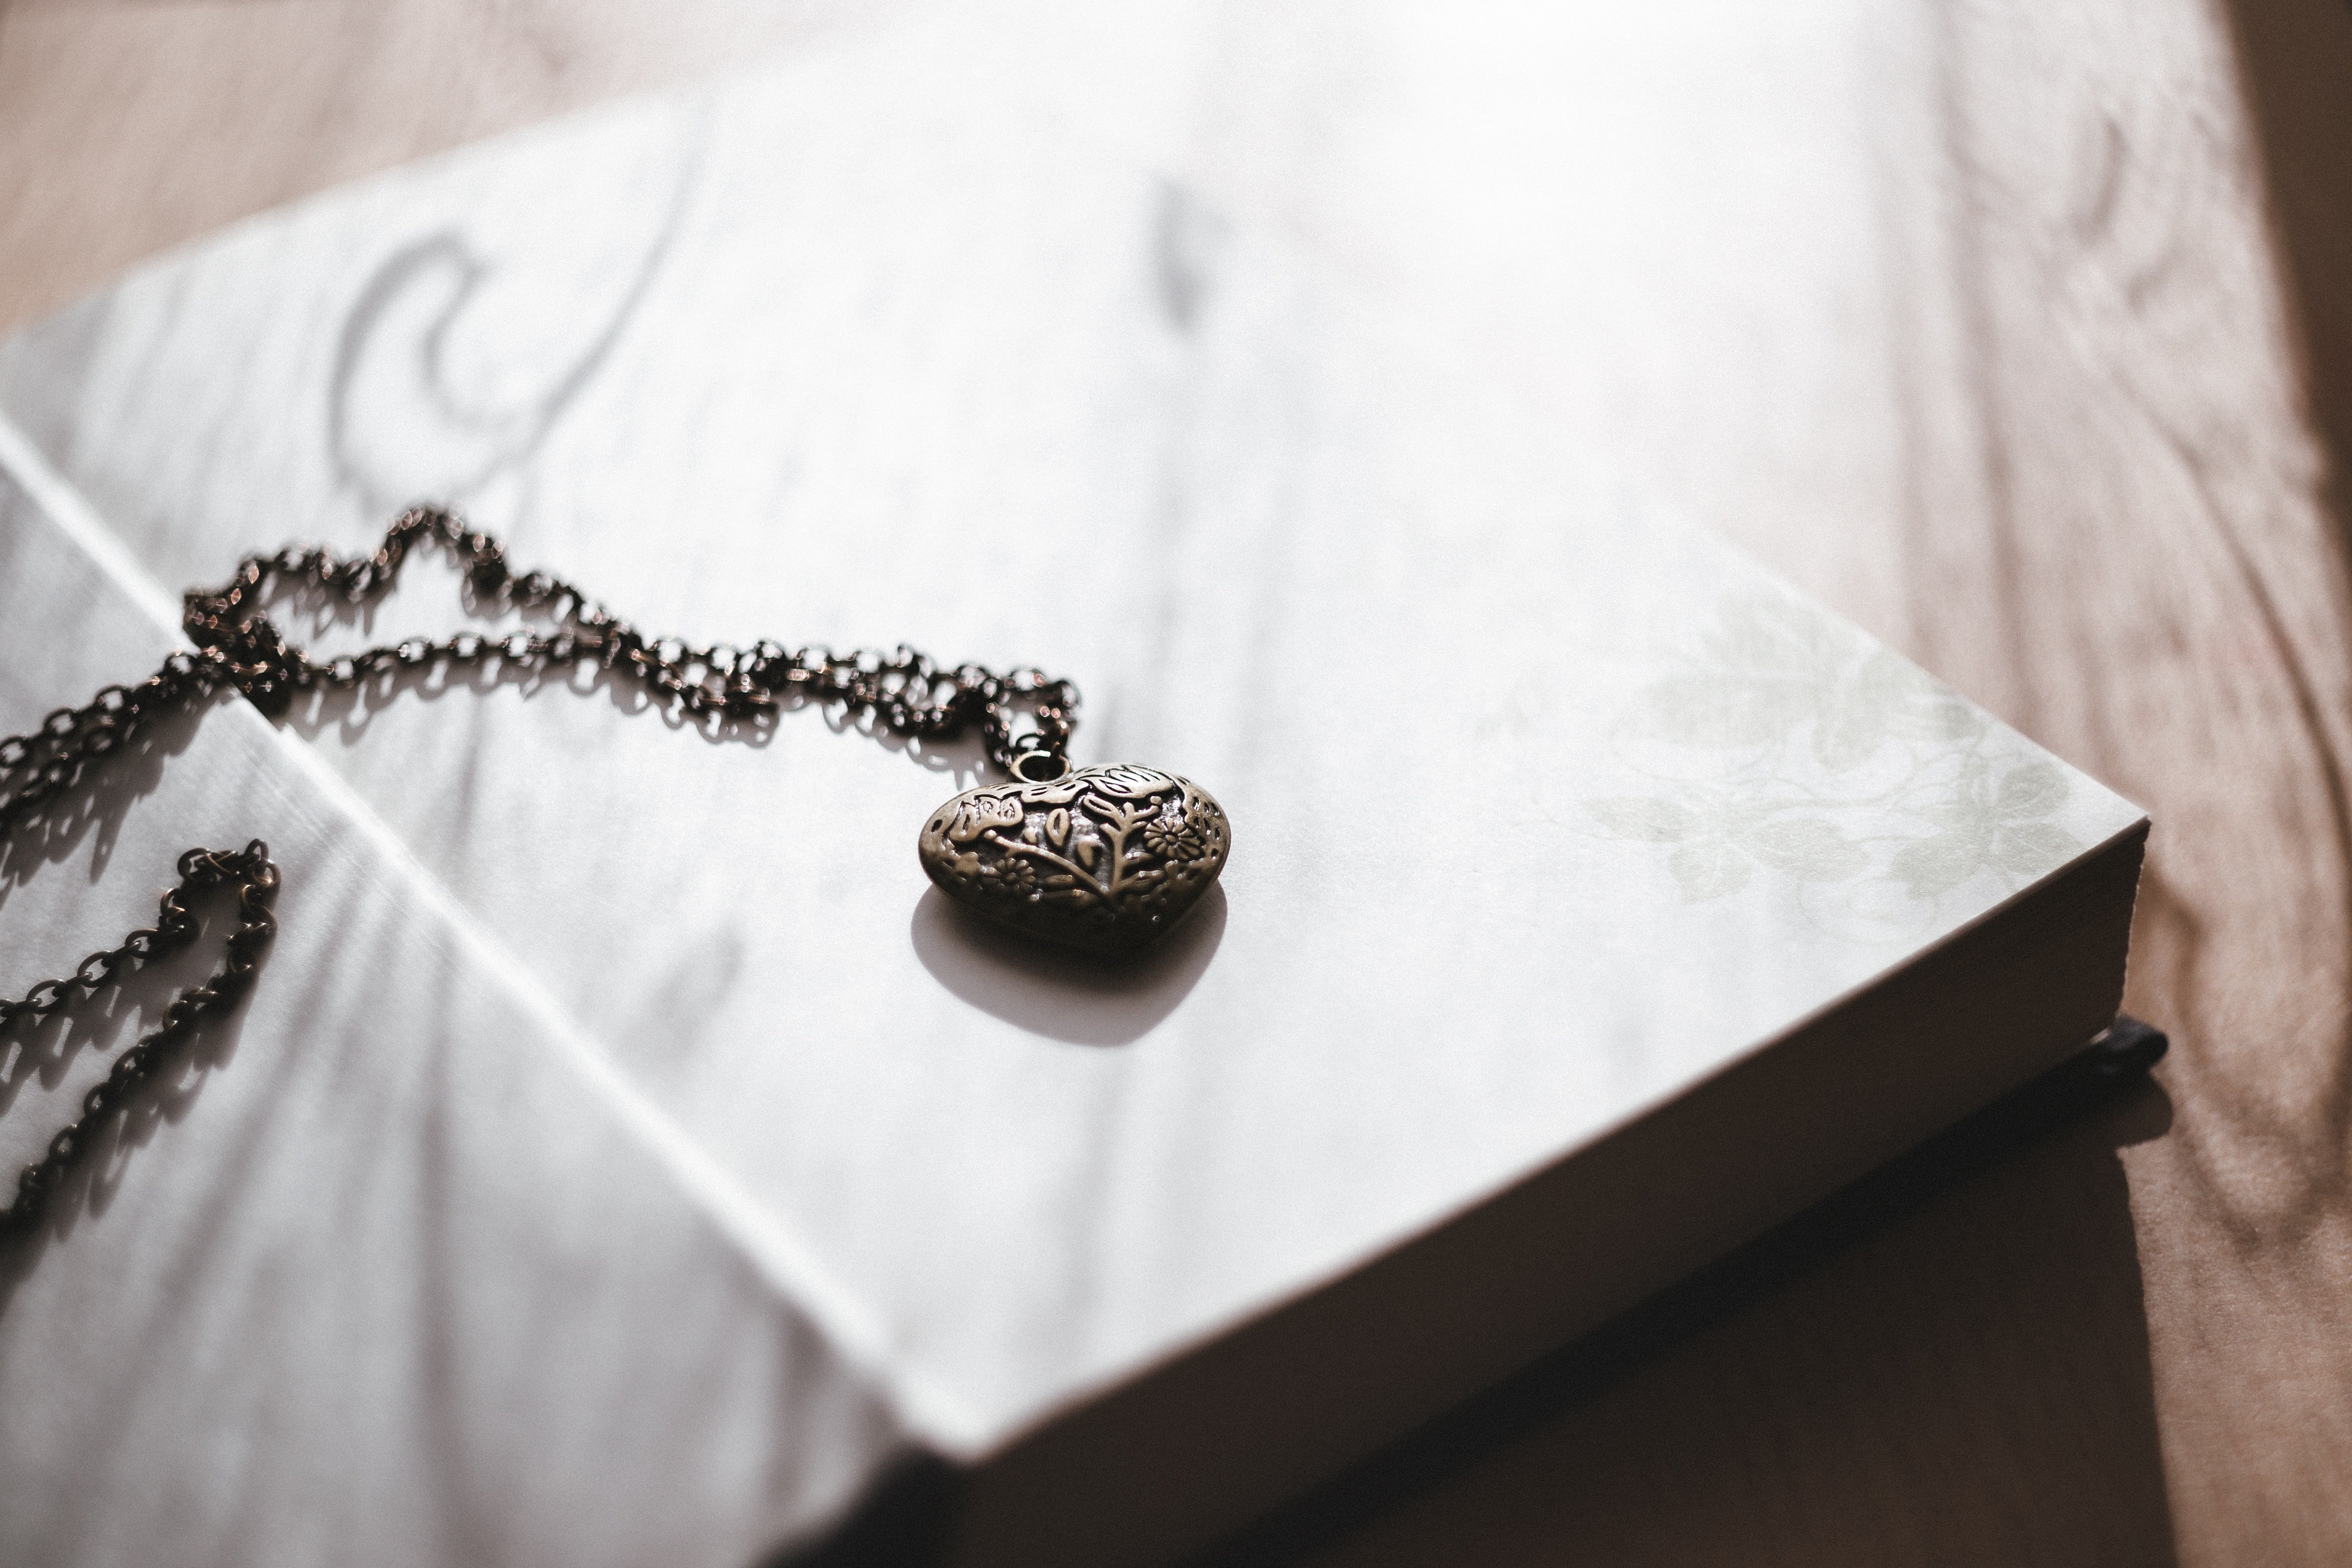 Anna found an old locket at the bottom of her jewelry box. | Source: Unsplash